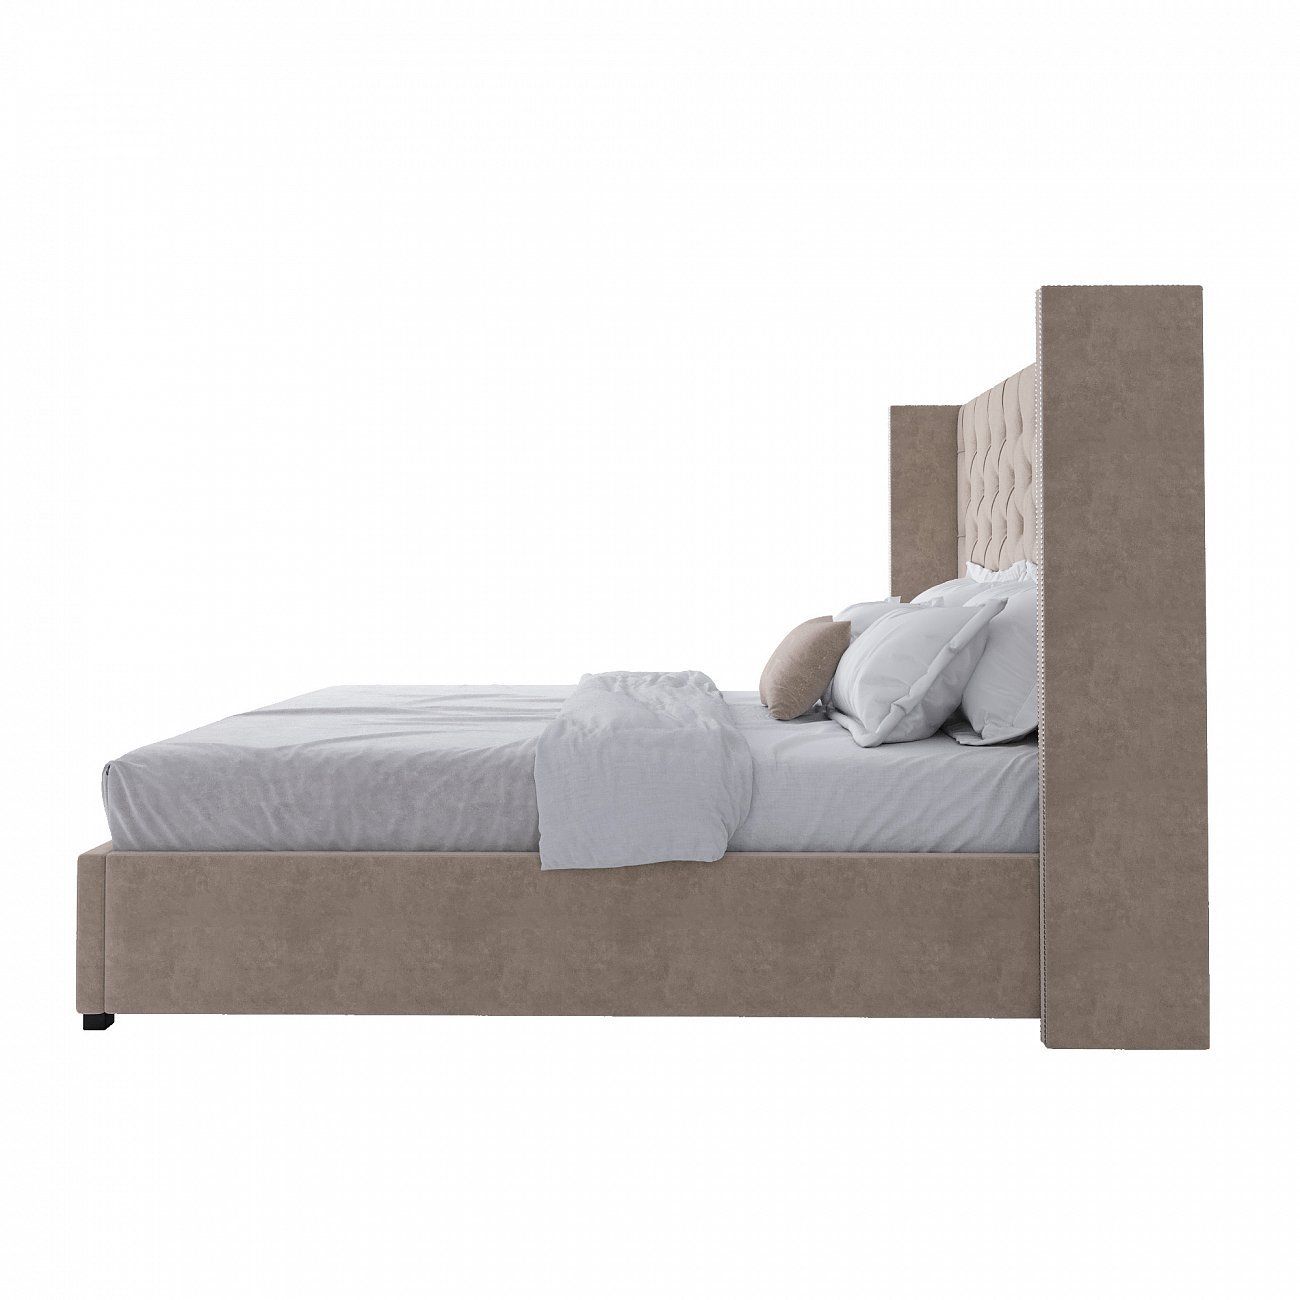 Double bed with upholstered headboard 180x200 cm beige Wing